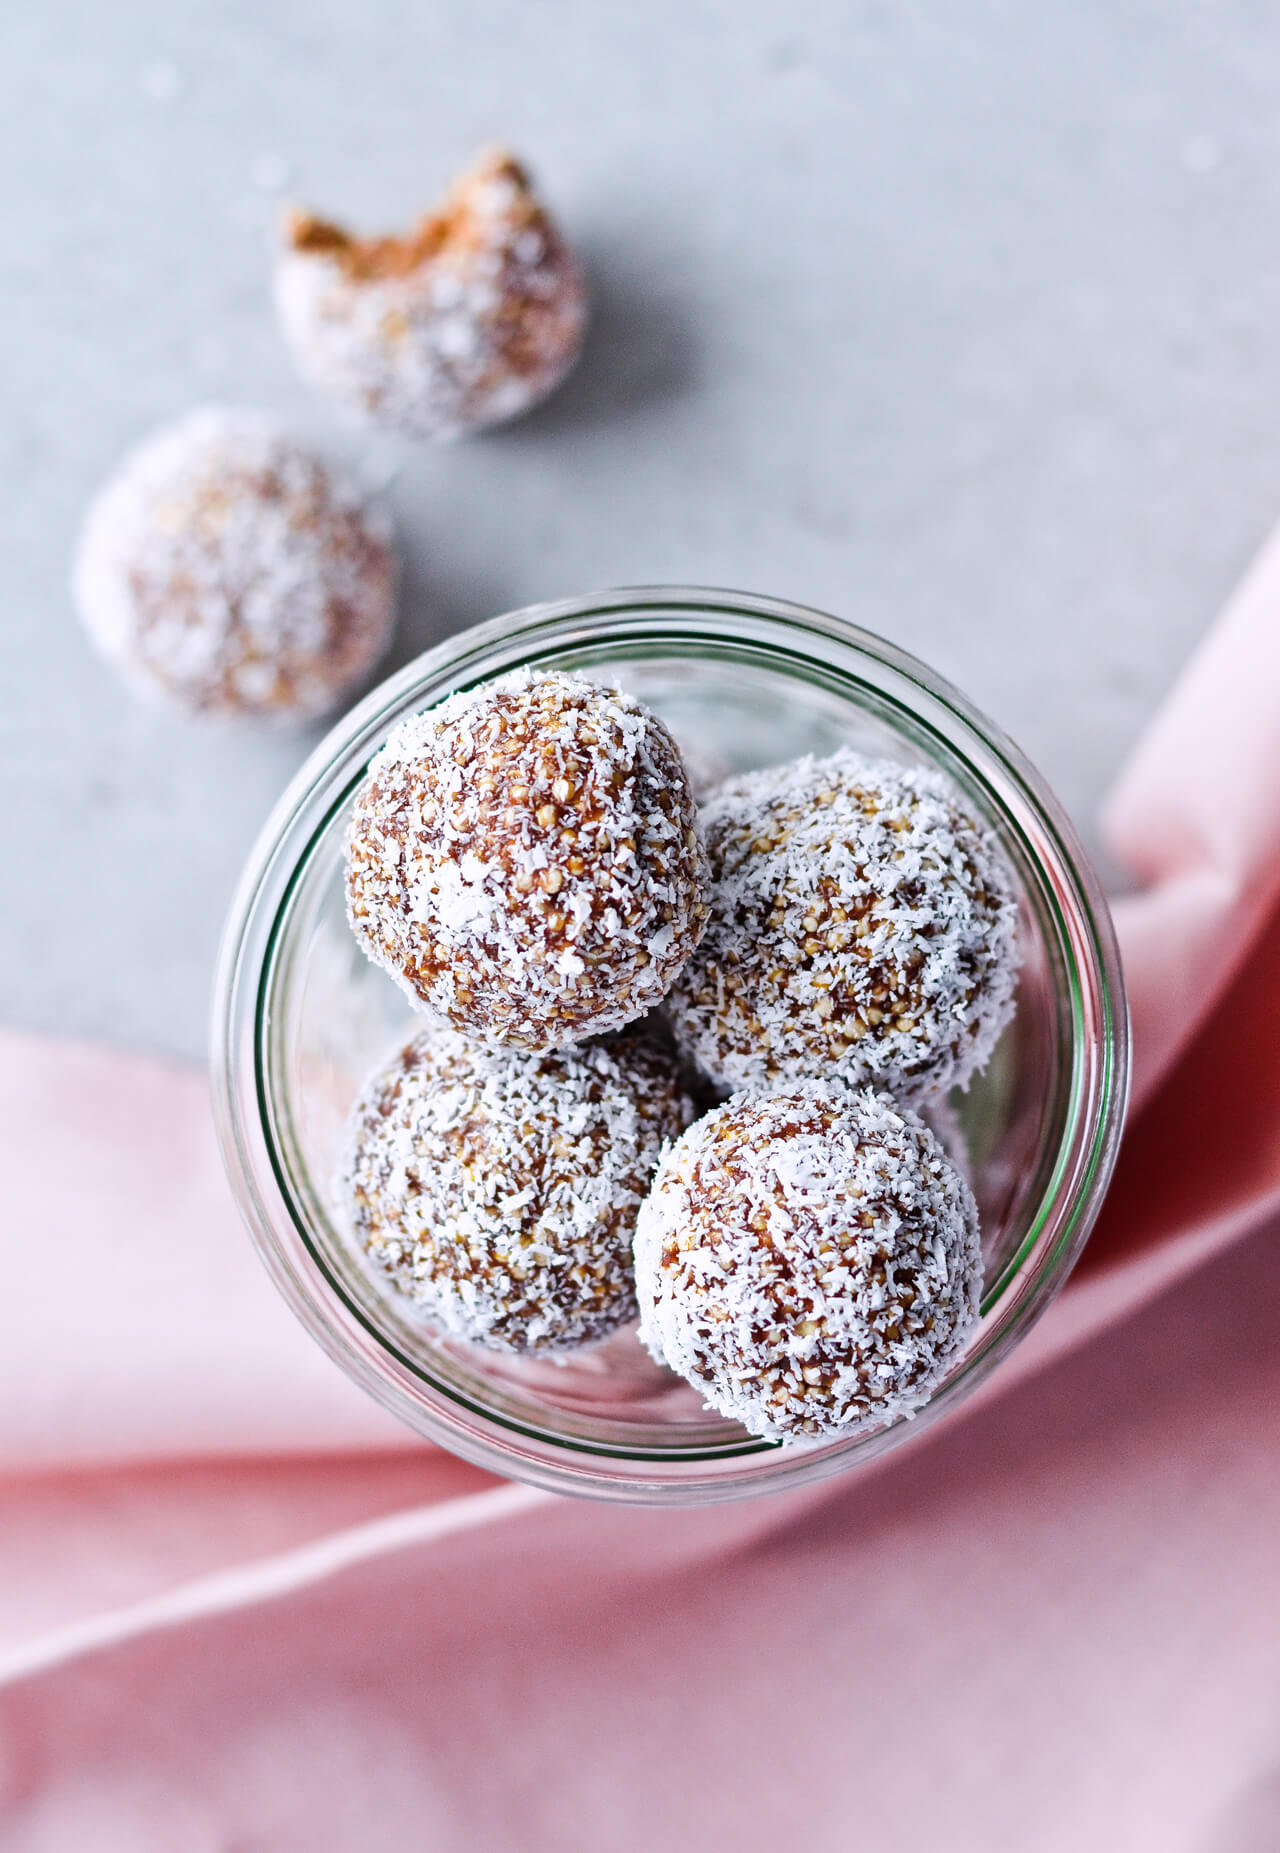 Recipe for Puffed quinoa date energy balls, packed with all the good stuff! Great healthy snack. | sugarsalted.com